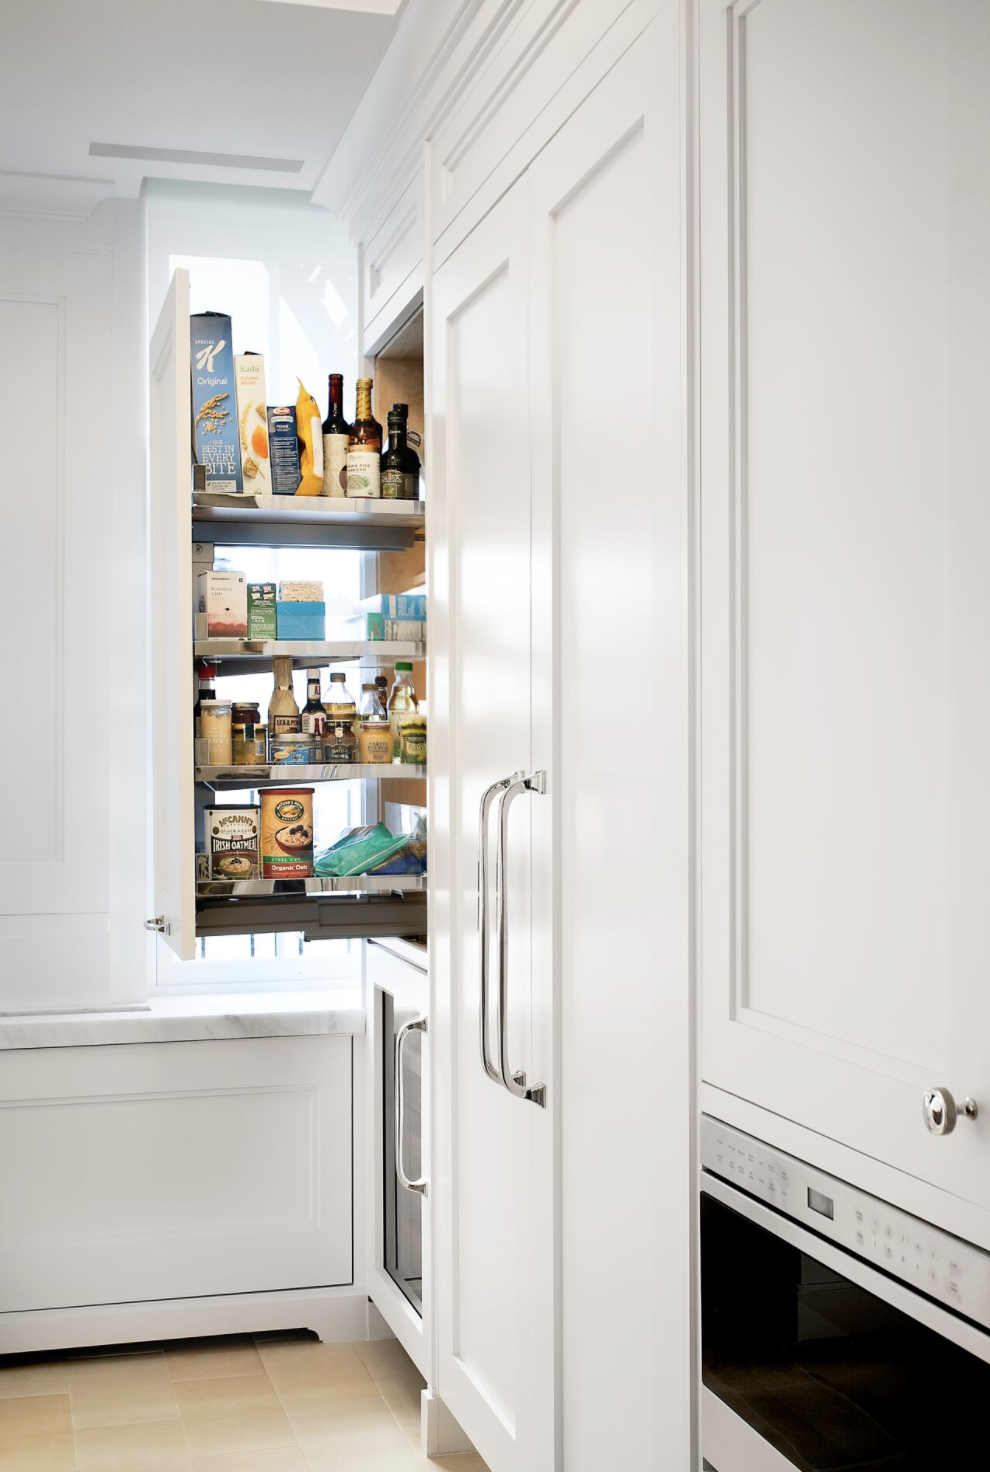 18 Pantry Organization Ideas and Tricks   How to Organize a Pantry